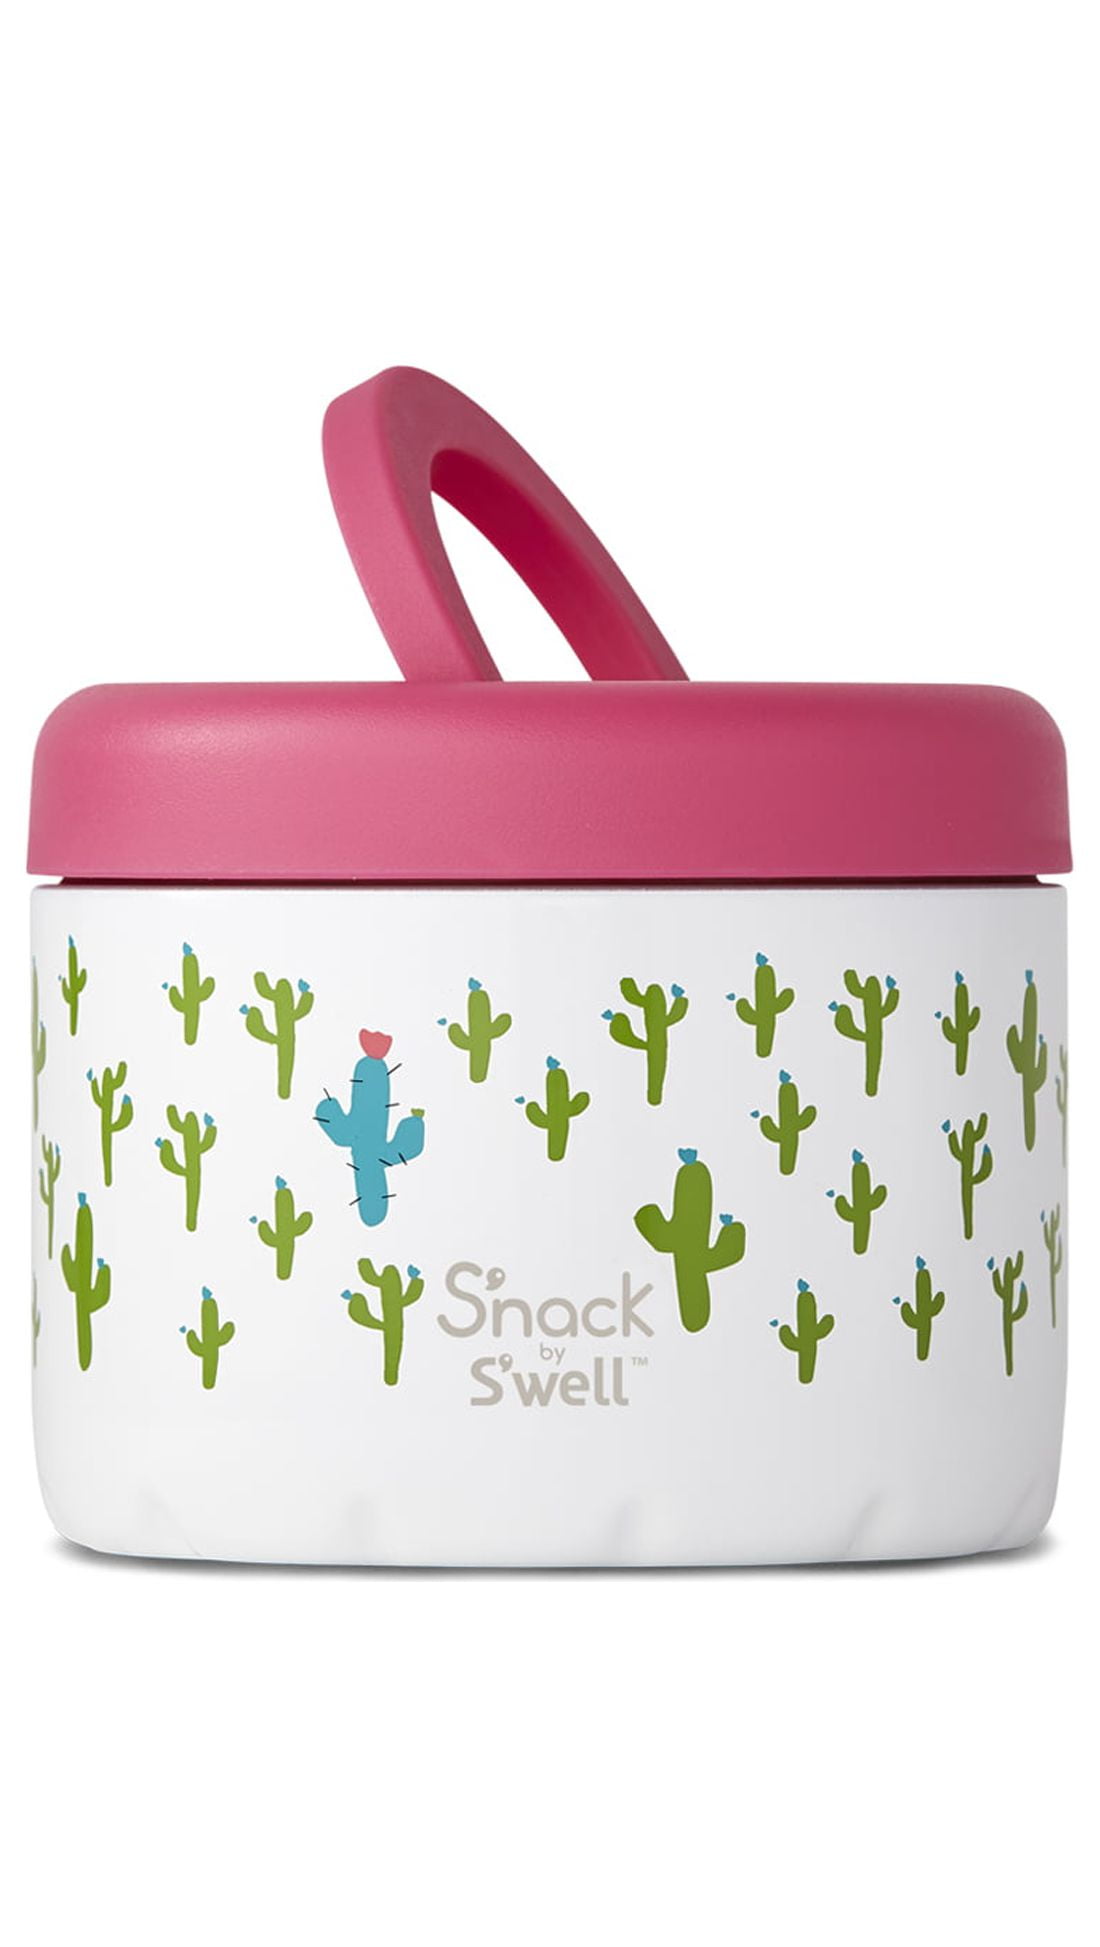 S'nack by S'well Stainless Steel Food Container, 24 Ounce Azure Forest 4.17 H x 5.0 W x 5.0 D